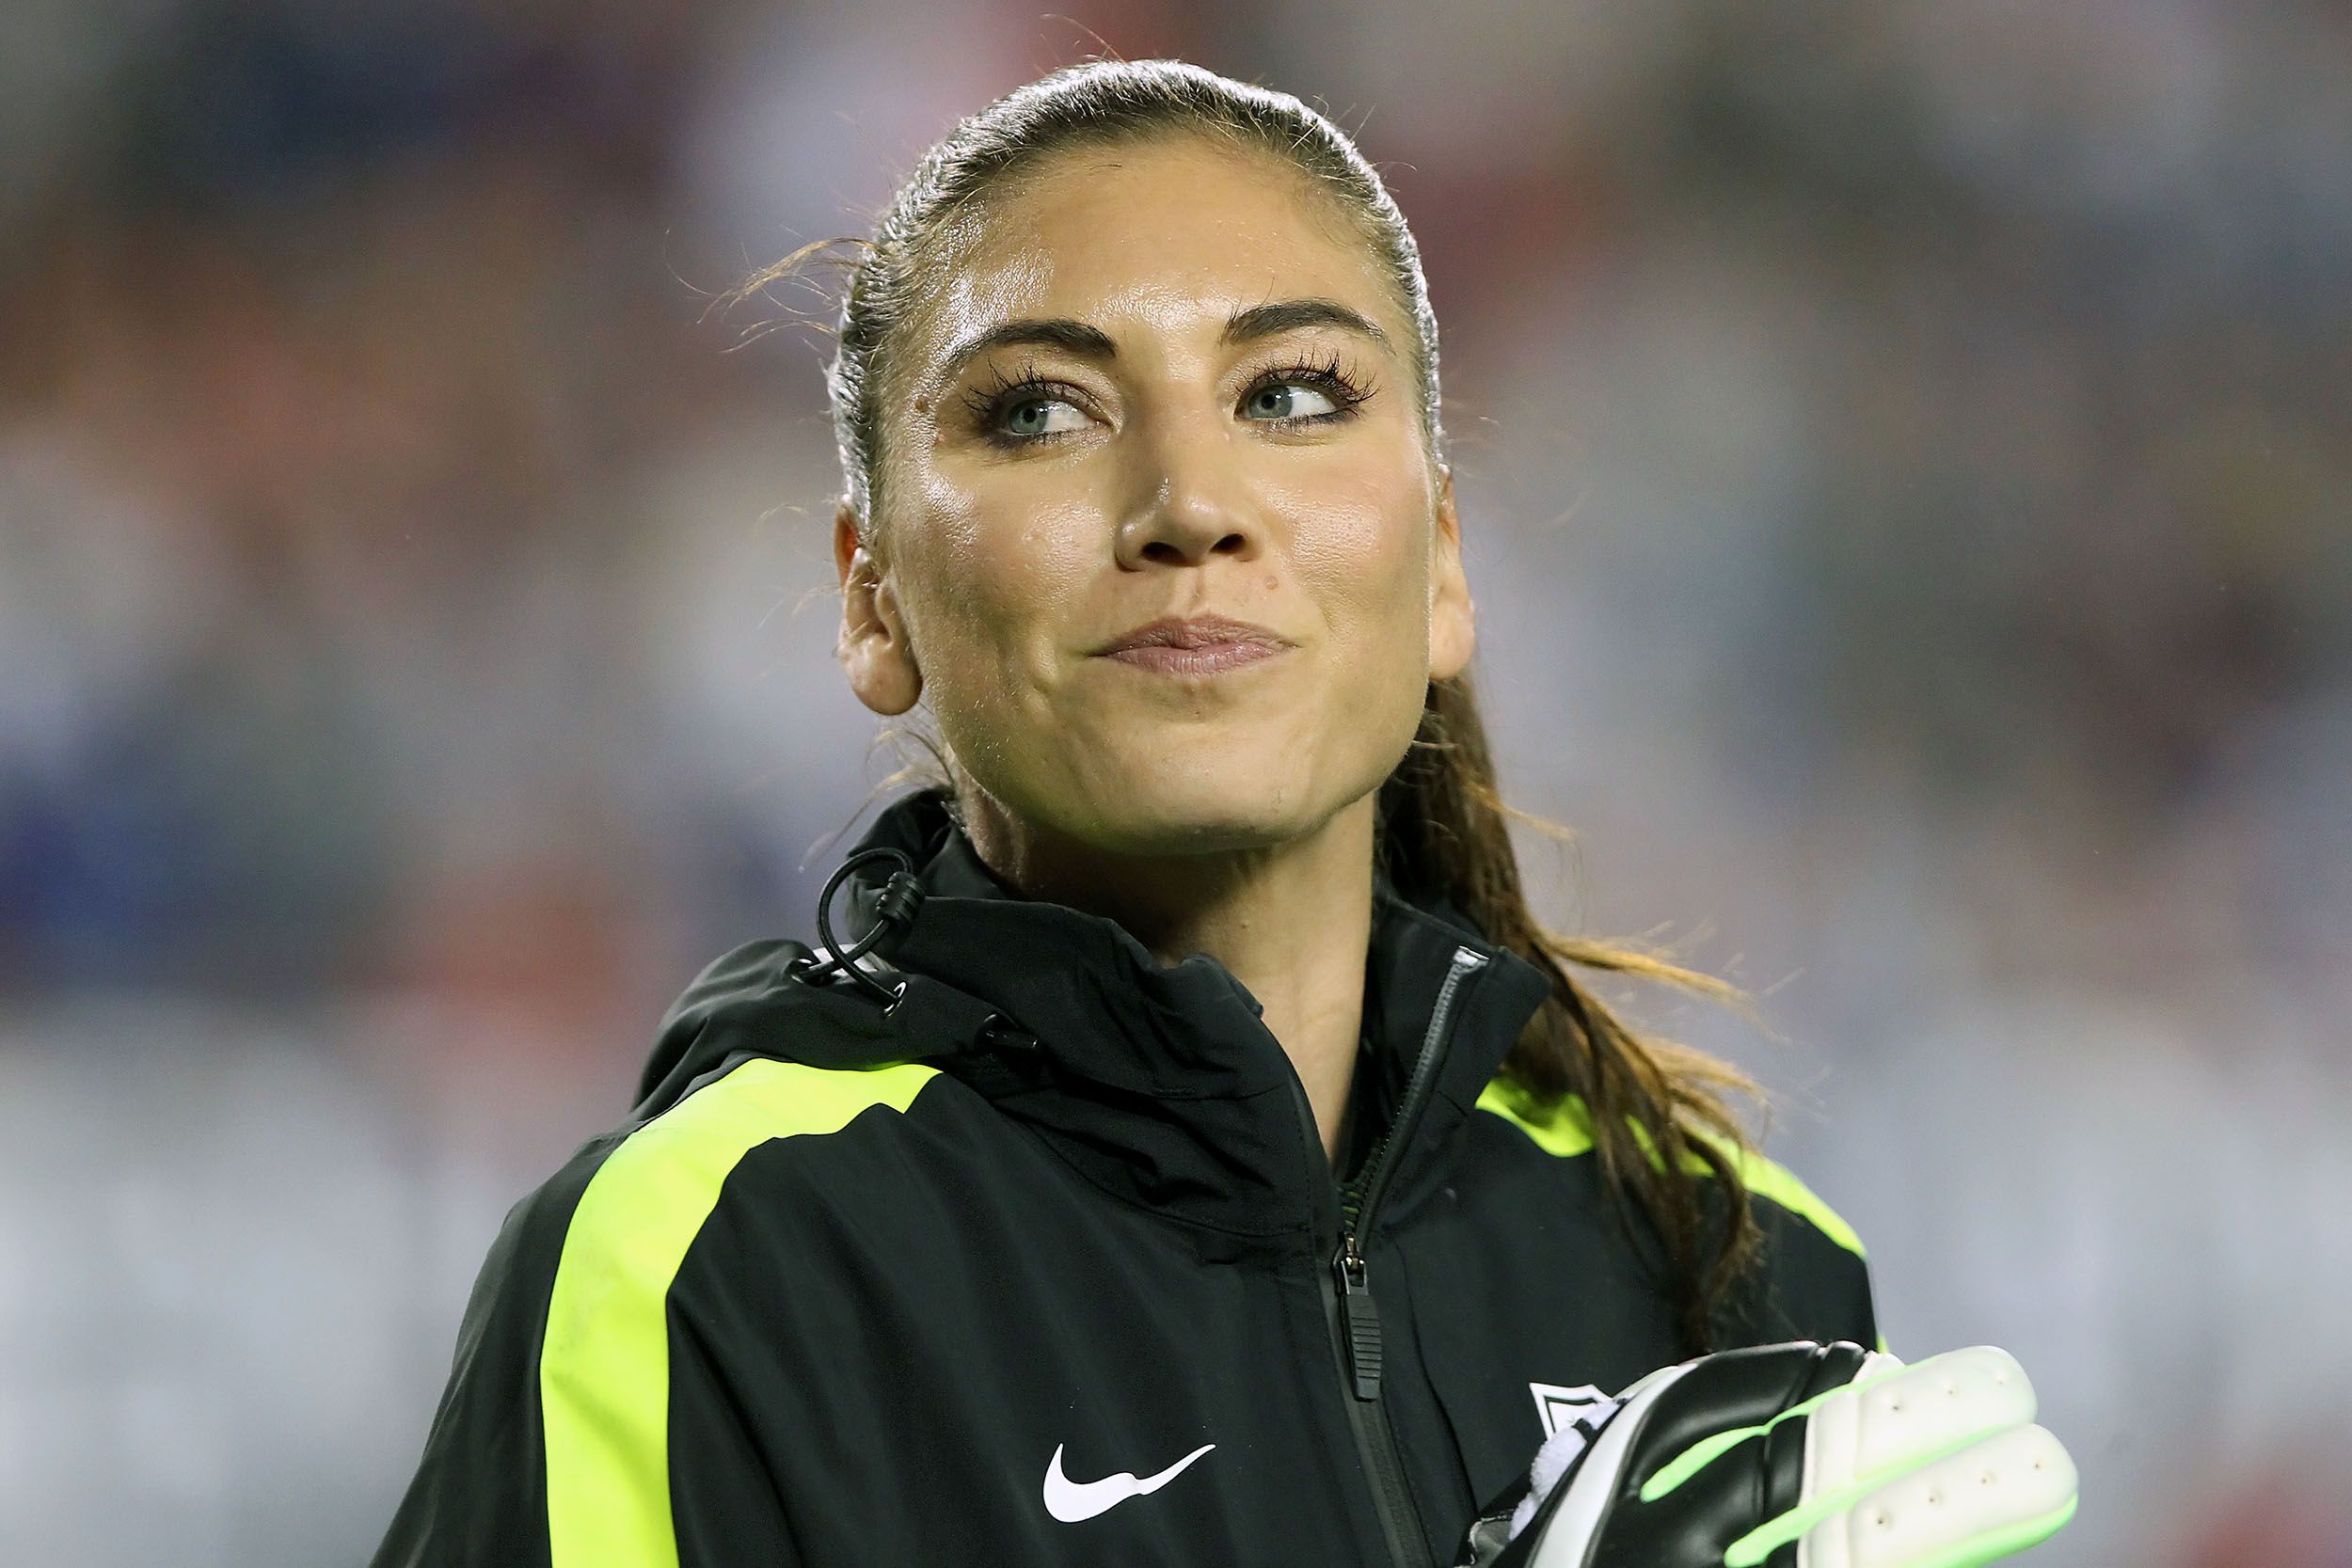 Former employee reveals: US Soccer wanted to hire a hit man to kill Hope Solo.